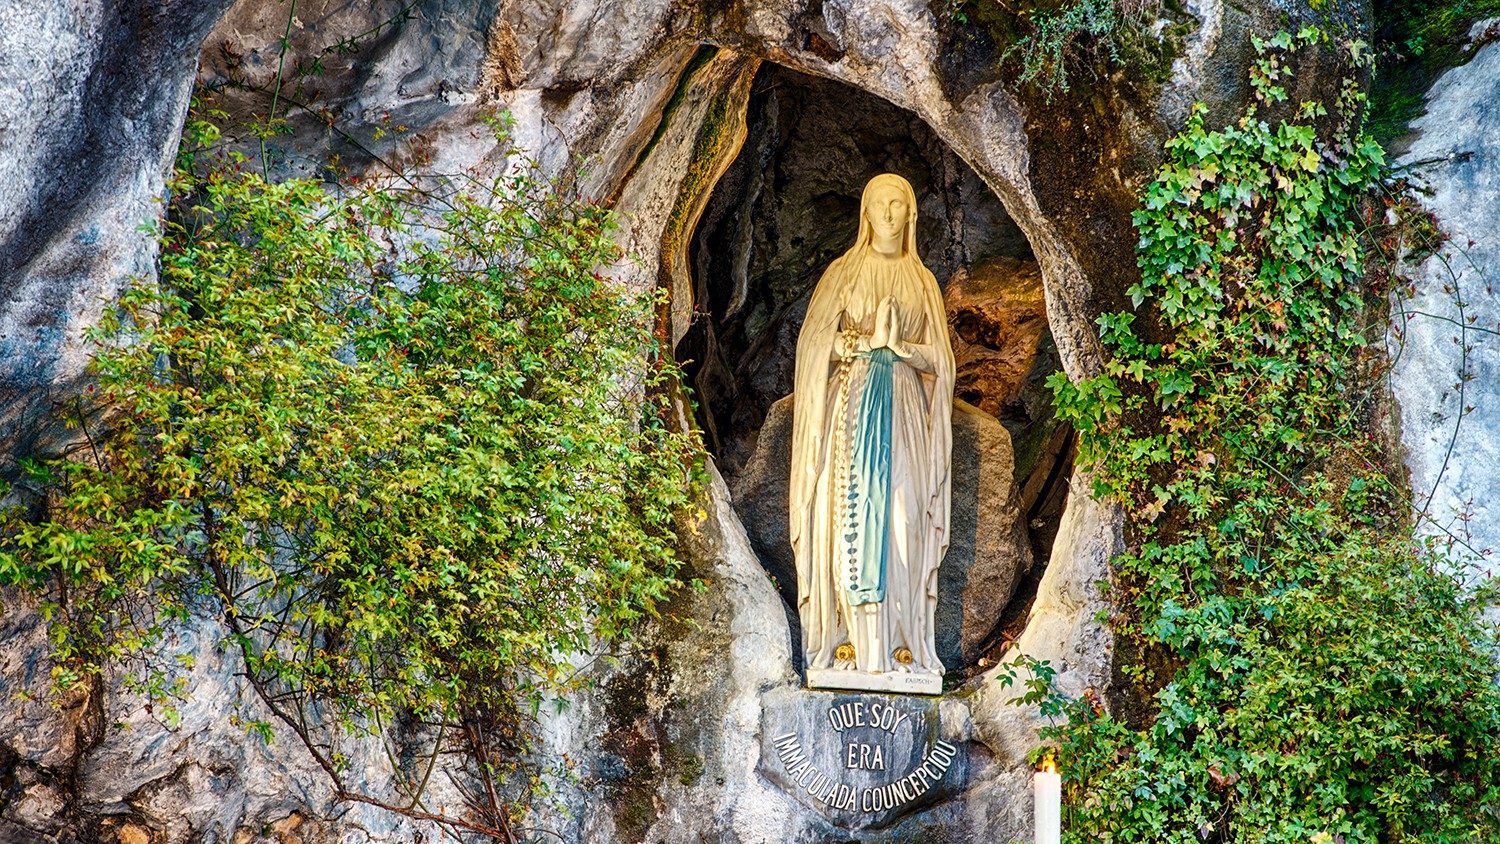 THE BUSINESSMAN RAFAEL NUNEZ APONTE AND HIS DEVOTION TO THE BLESSED VIRGIN OF LOURDES